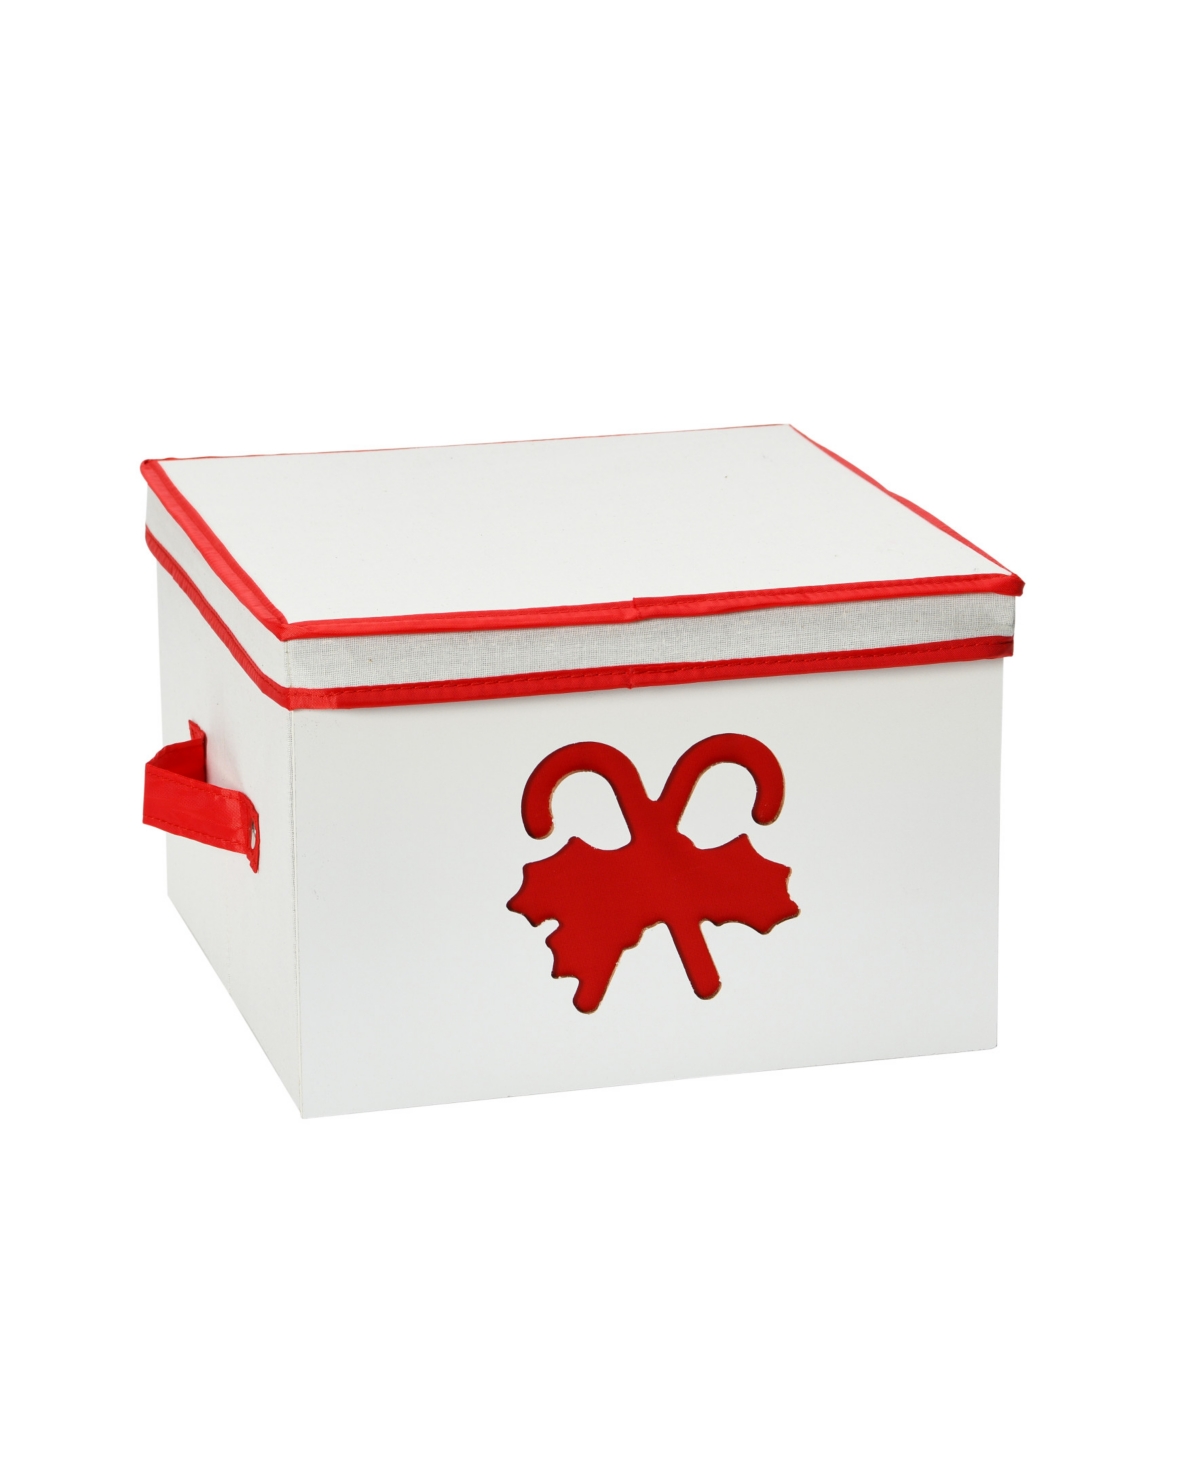 Household Essentials Holiday Box, Medium Red Candy Cane In Cream